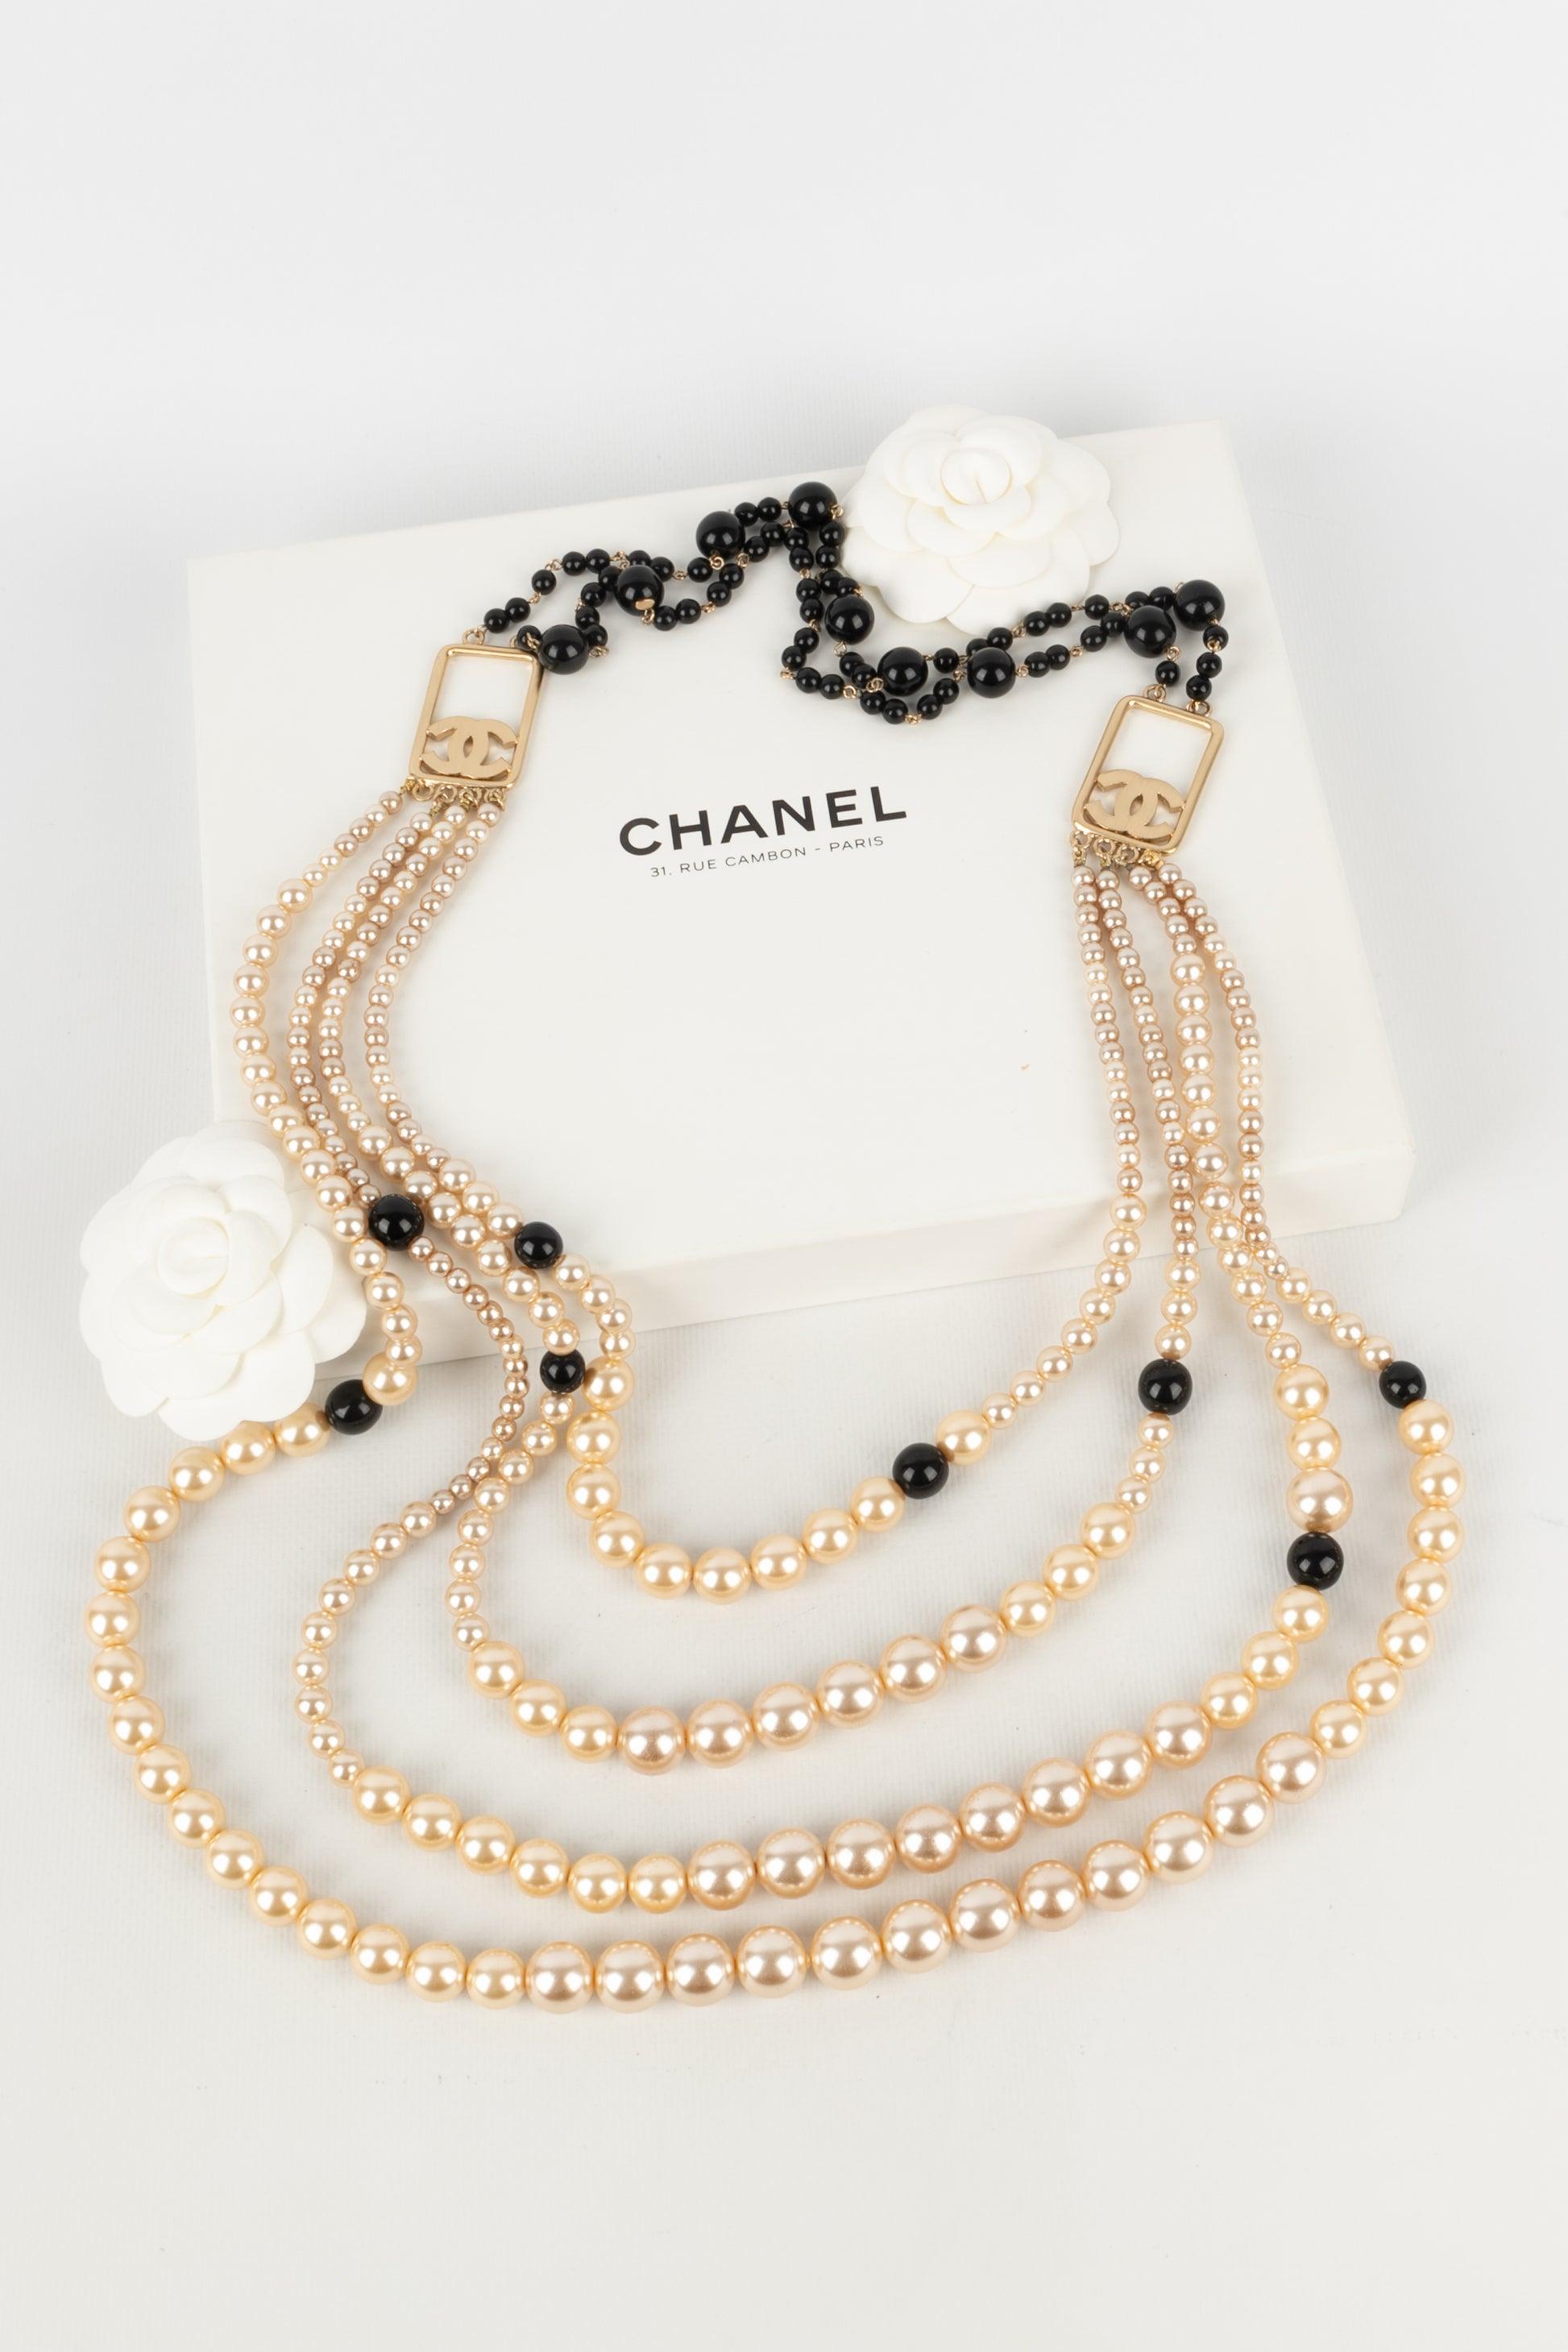 Chanel Long Necklace with Costume Pearls and Black Glass Pearls, 2003 4